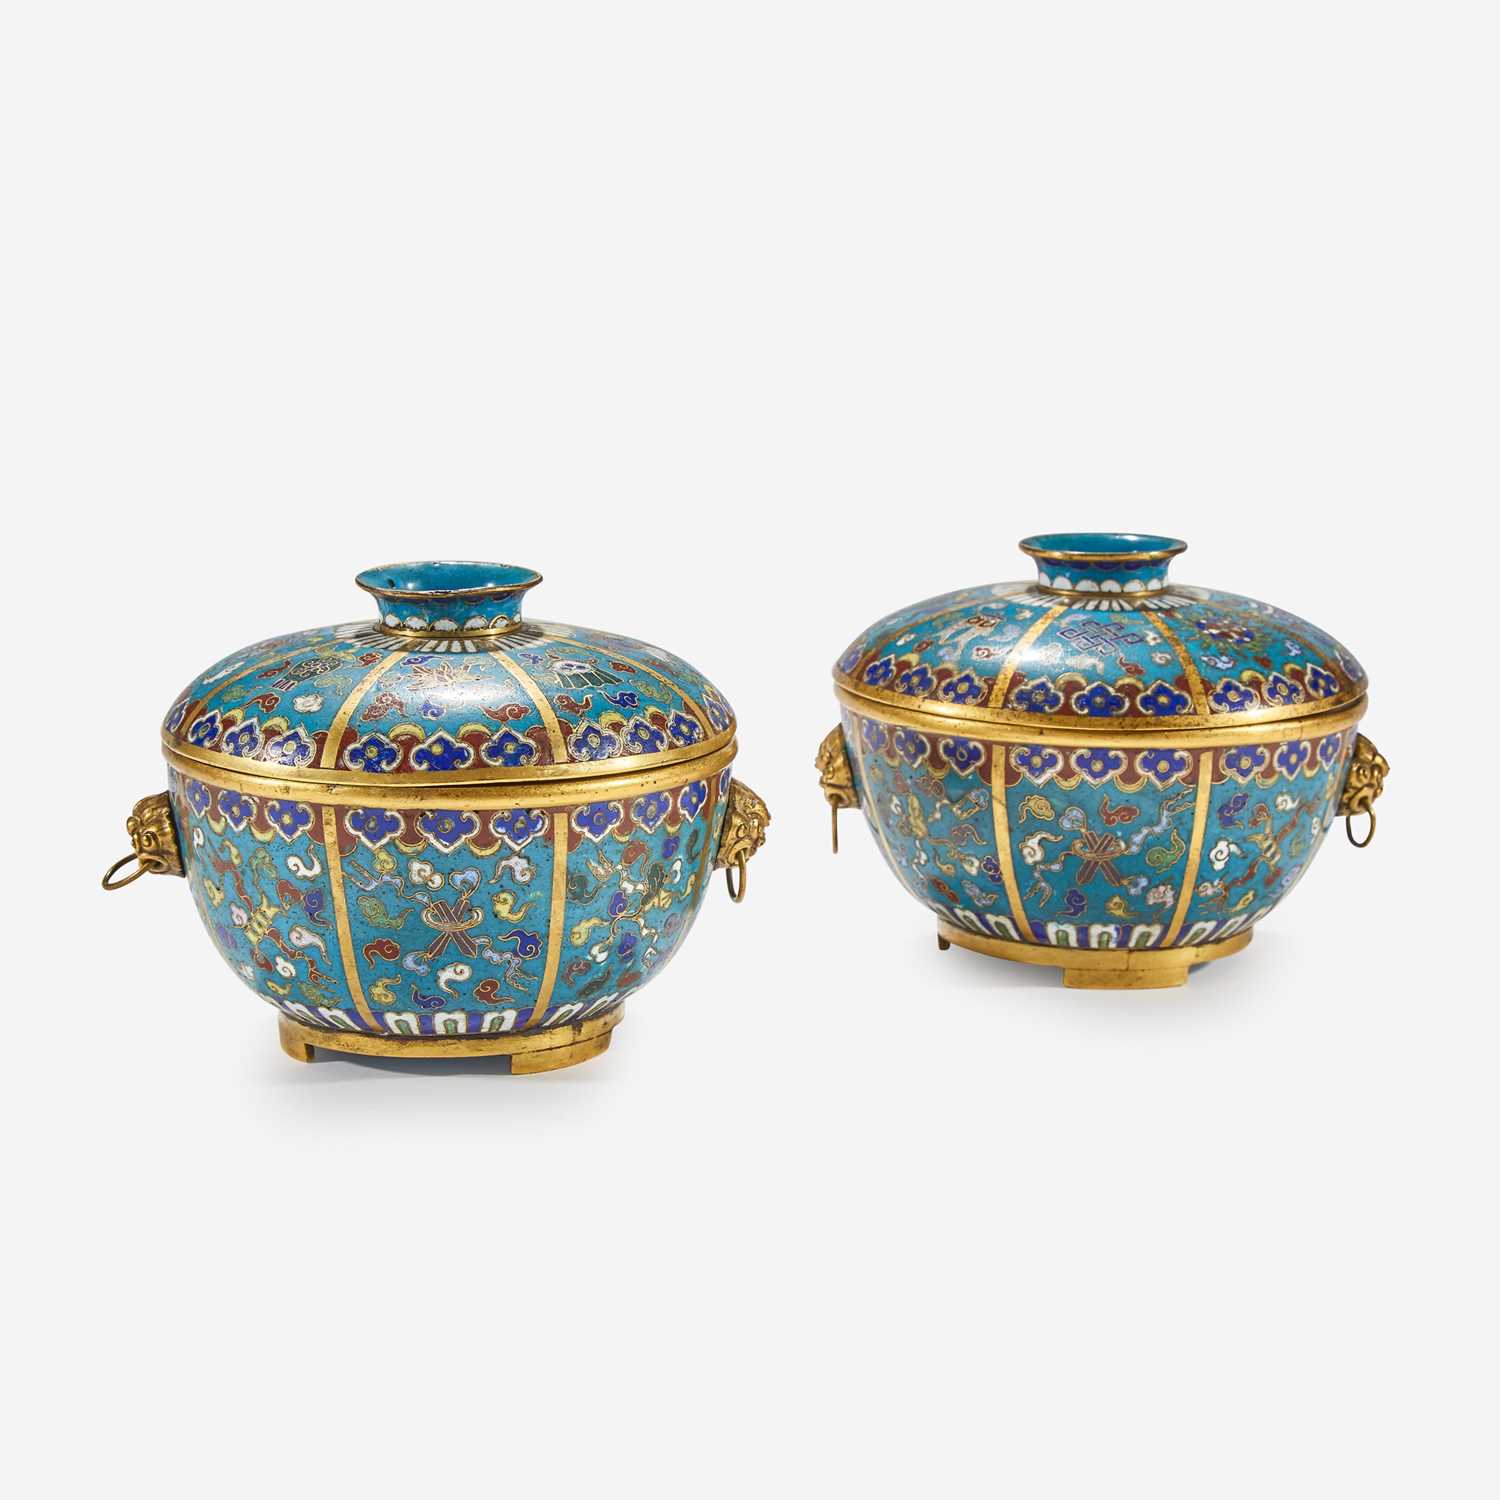 Lot 112 - A pair of Chinese cloisonné covered circular bowls